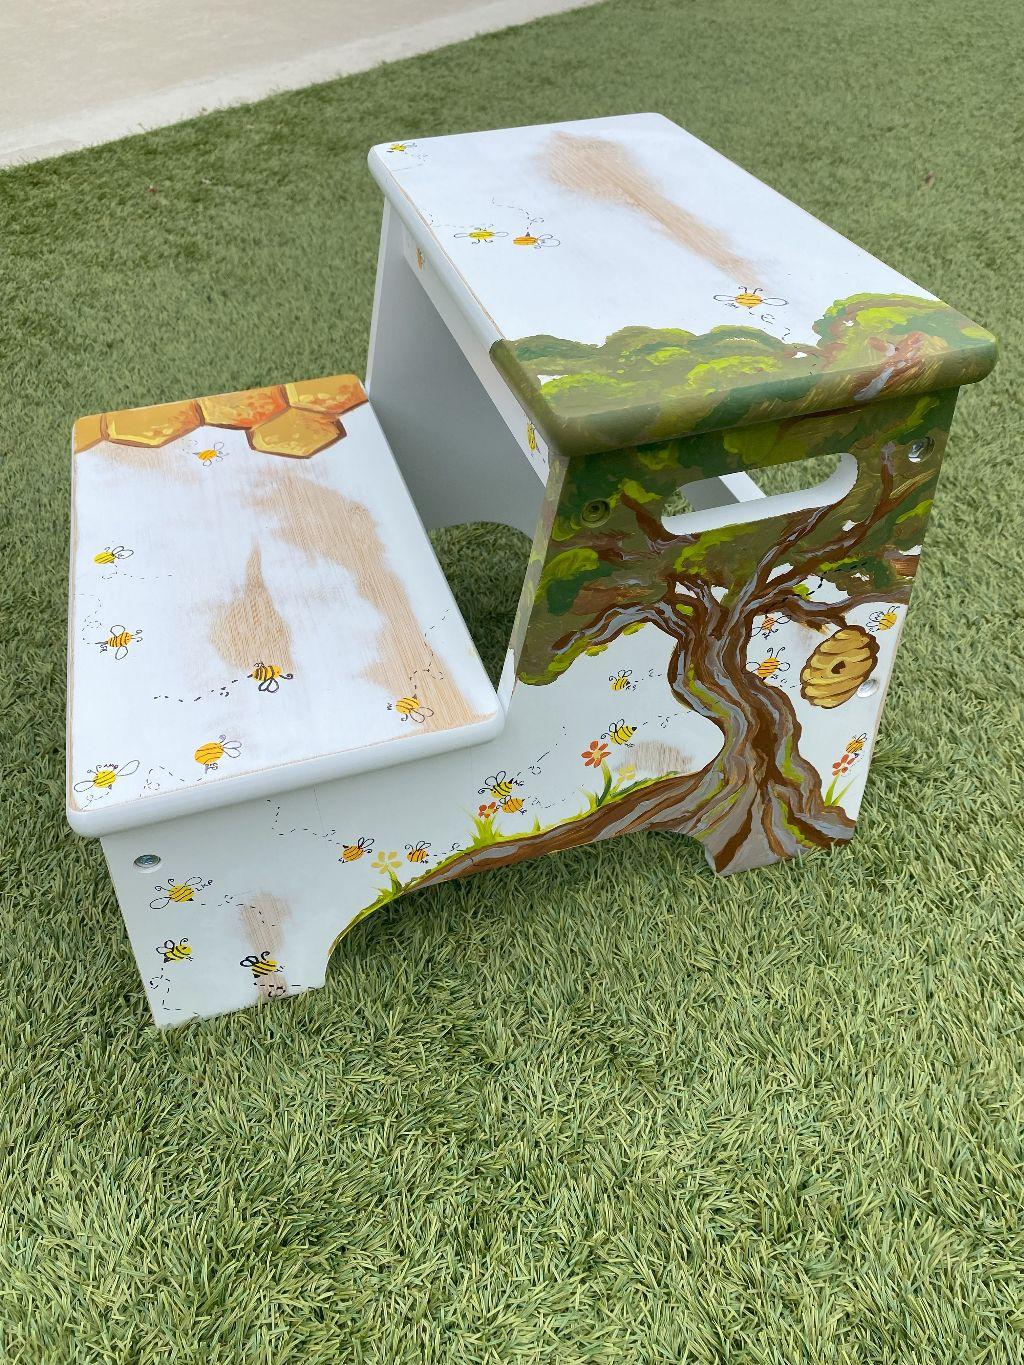 Bumblebee Art Project - Hand Painted Step Stool